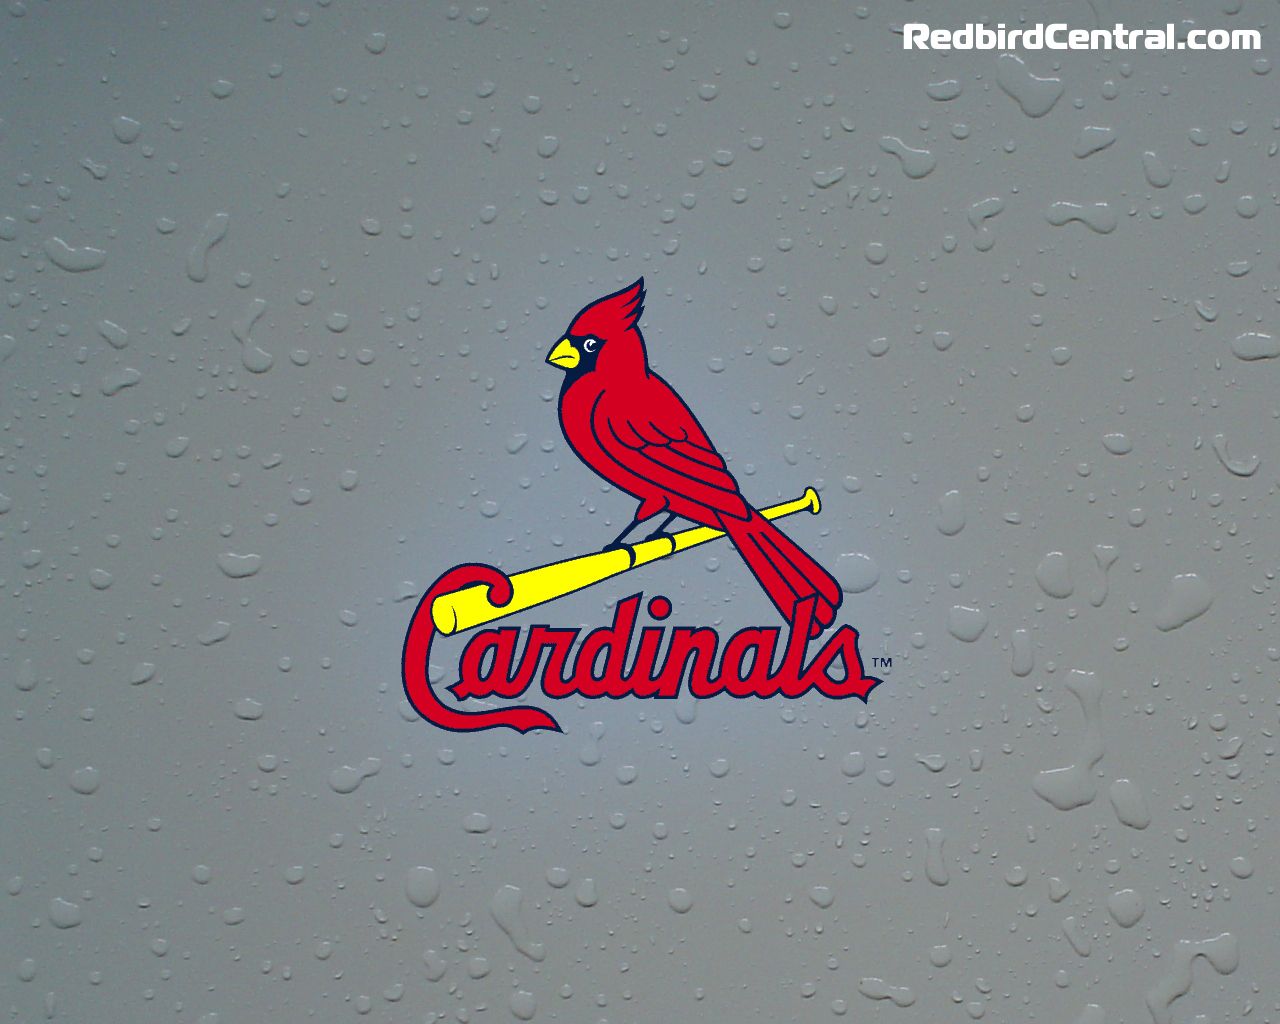 St. Louis Cardinals iPhone 5 wallpaper by LicoriceJack on DeviantArt